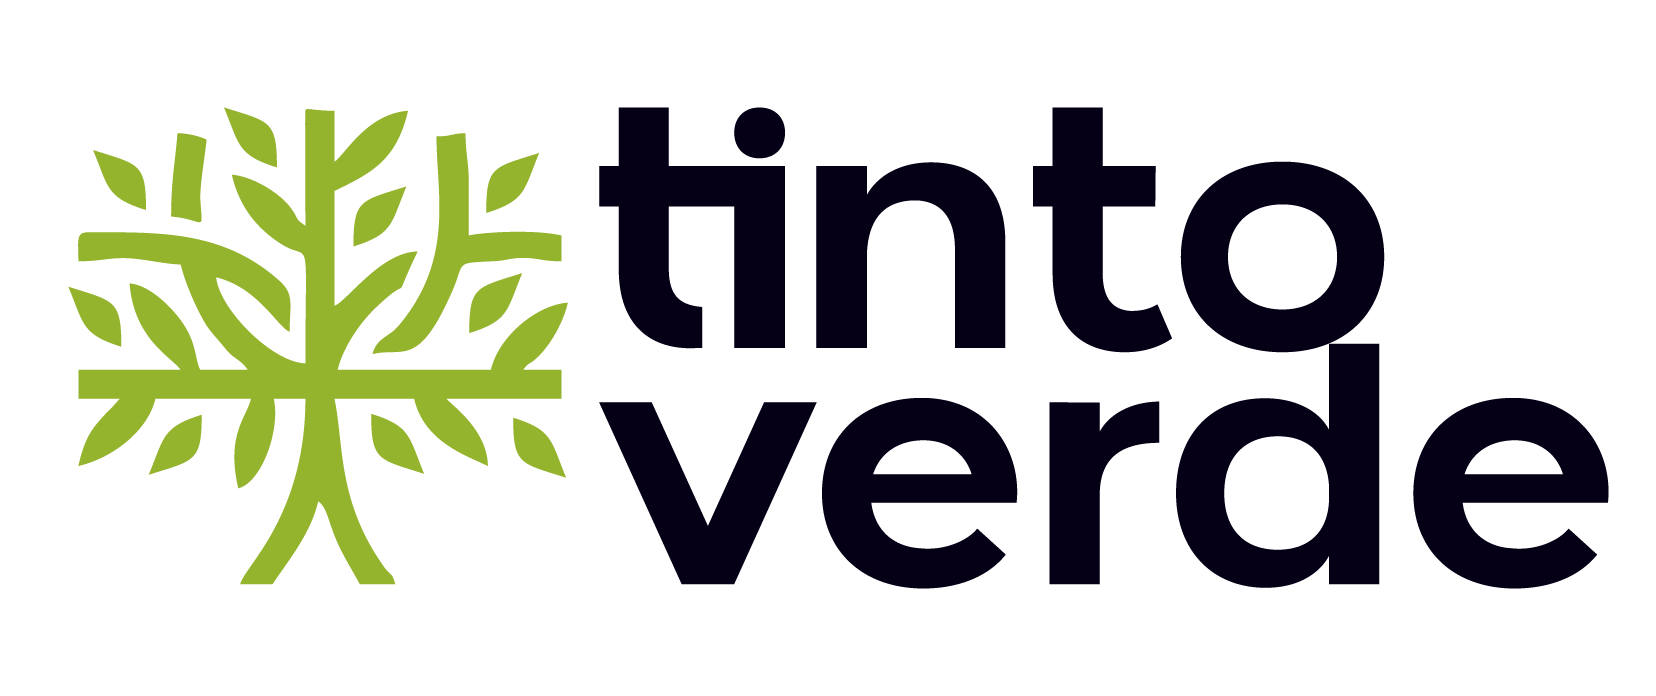 Tintoverde